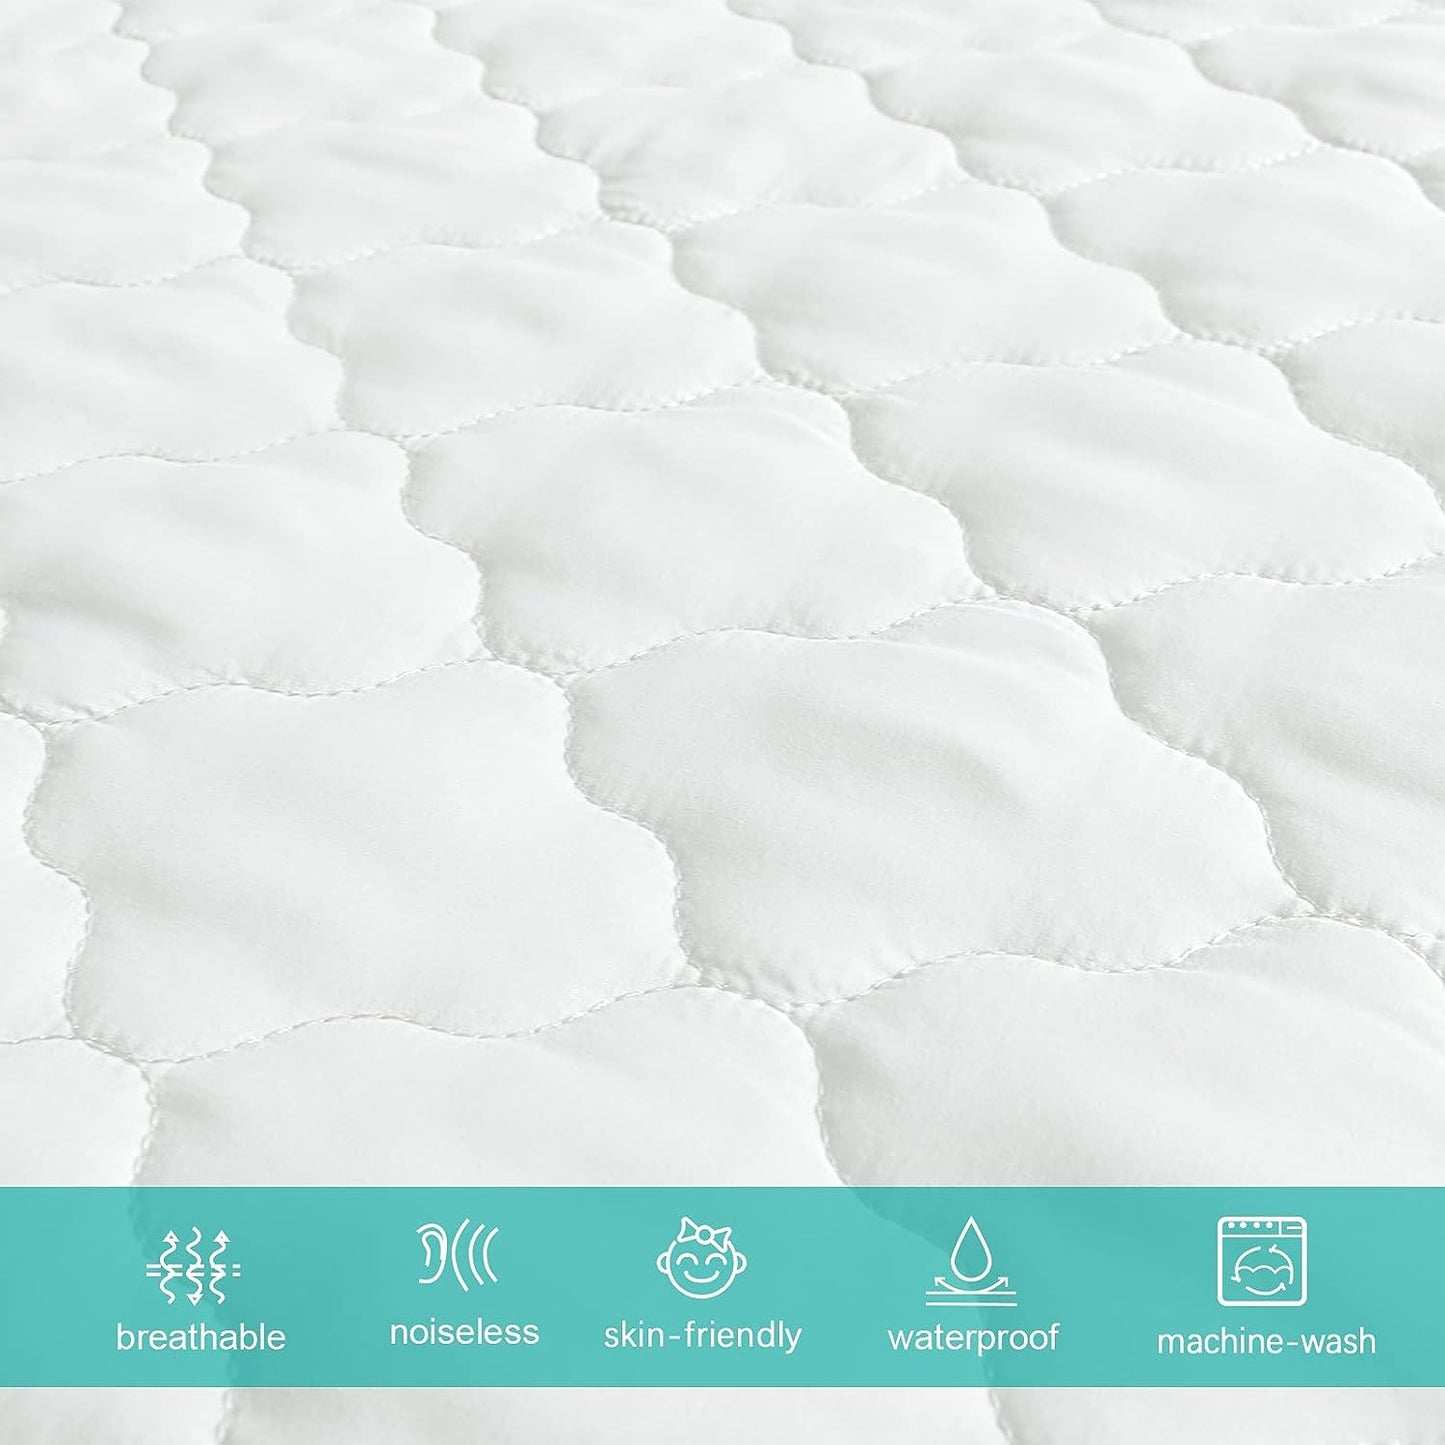 Pack N Play Waterproof Baby Crib Mattress Pad - 39" x 27" Fitted Cover Protector for Mini & Portable Playard Mattresses - Hypoallergenic Ultra Soft Padding -White